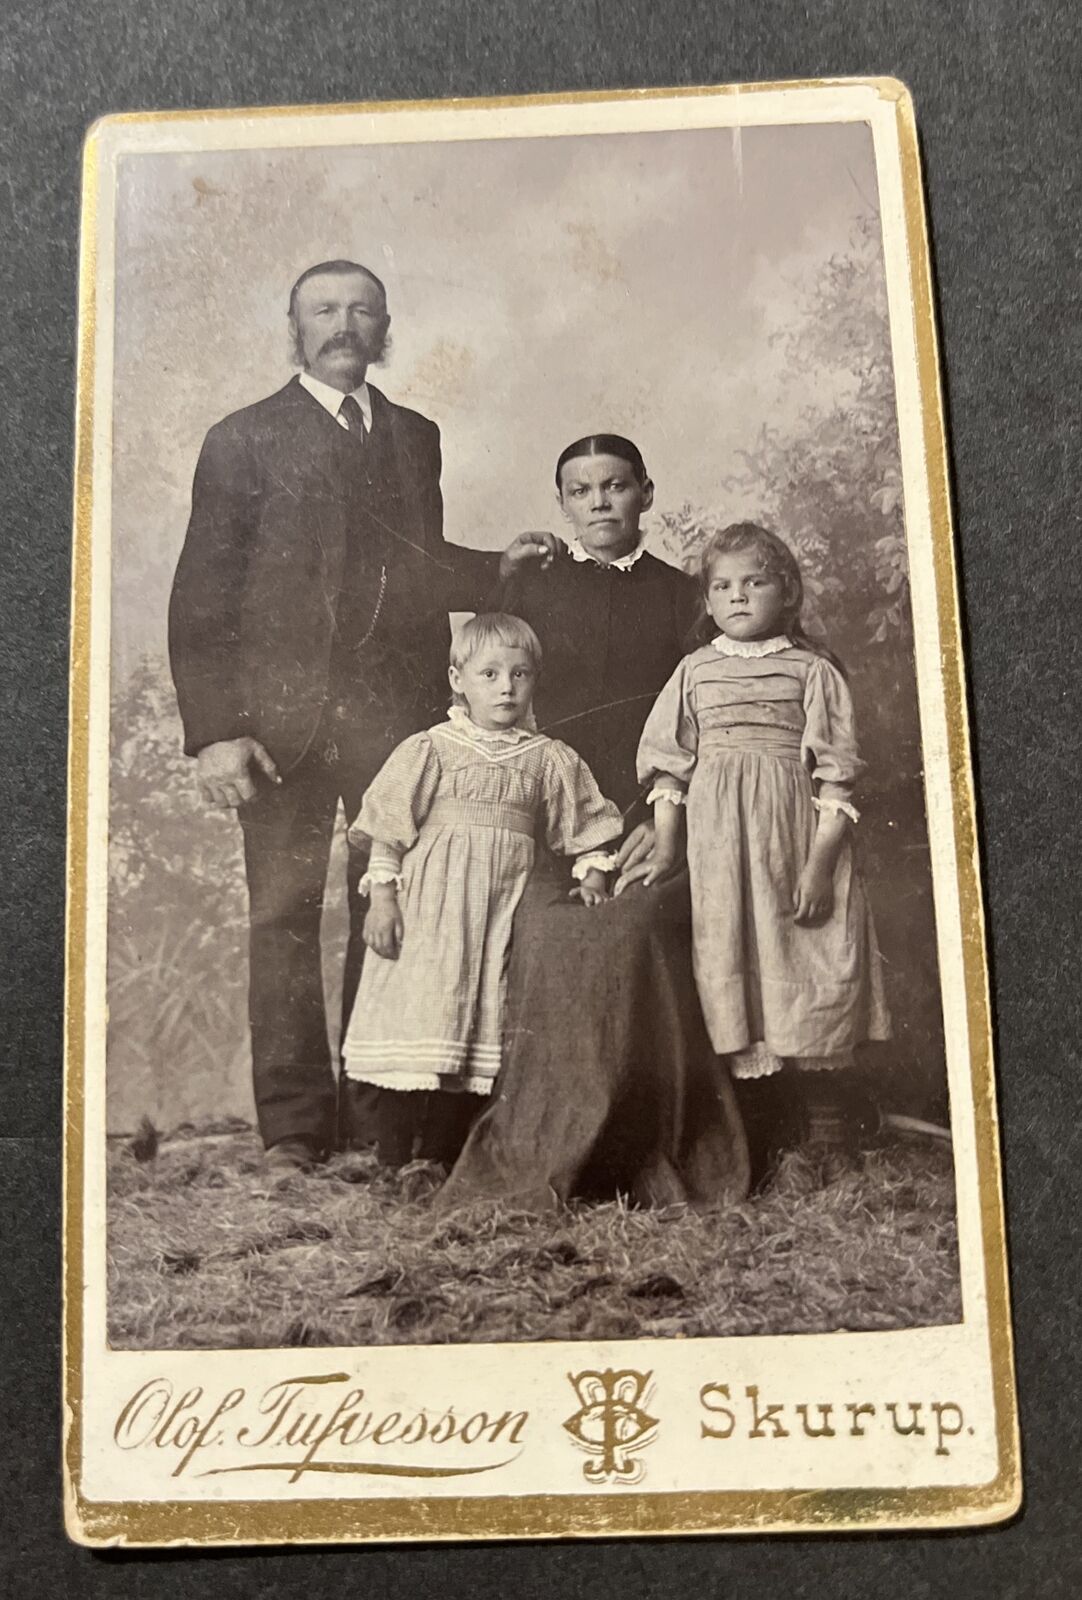 Vintage Cabinet Card of Wonderful Young Family-Children- Olaf Tufvesson-Skurup